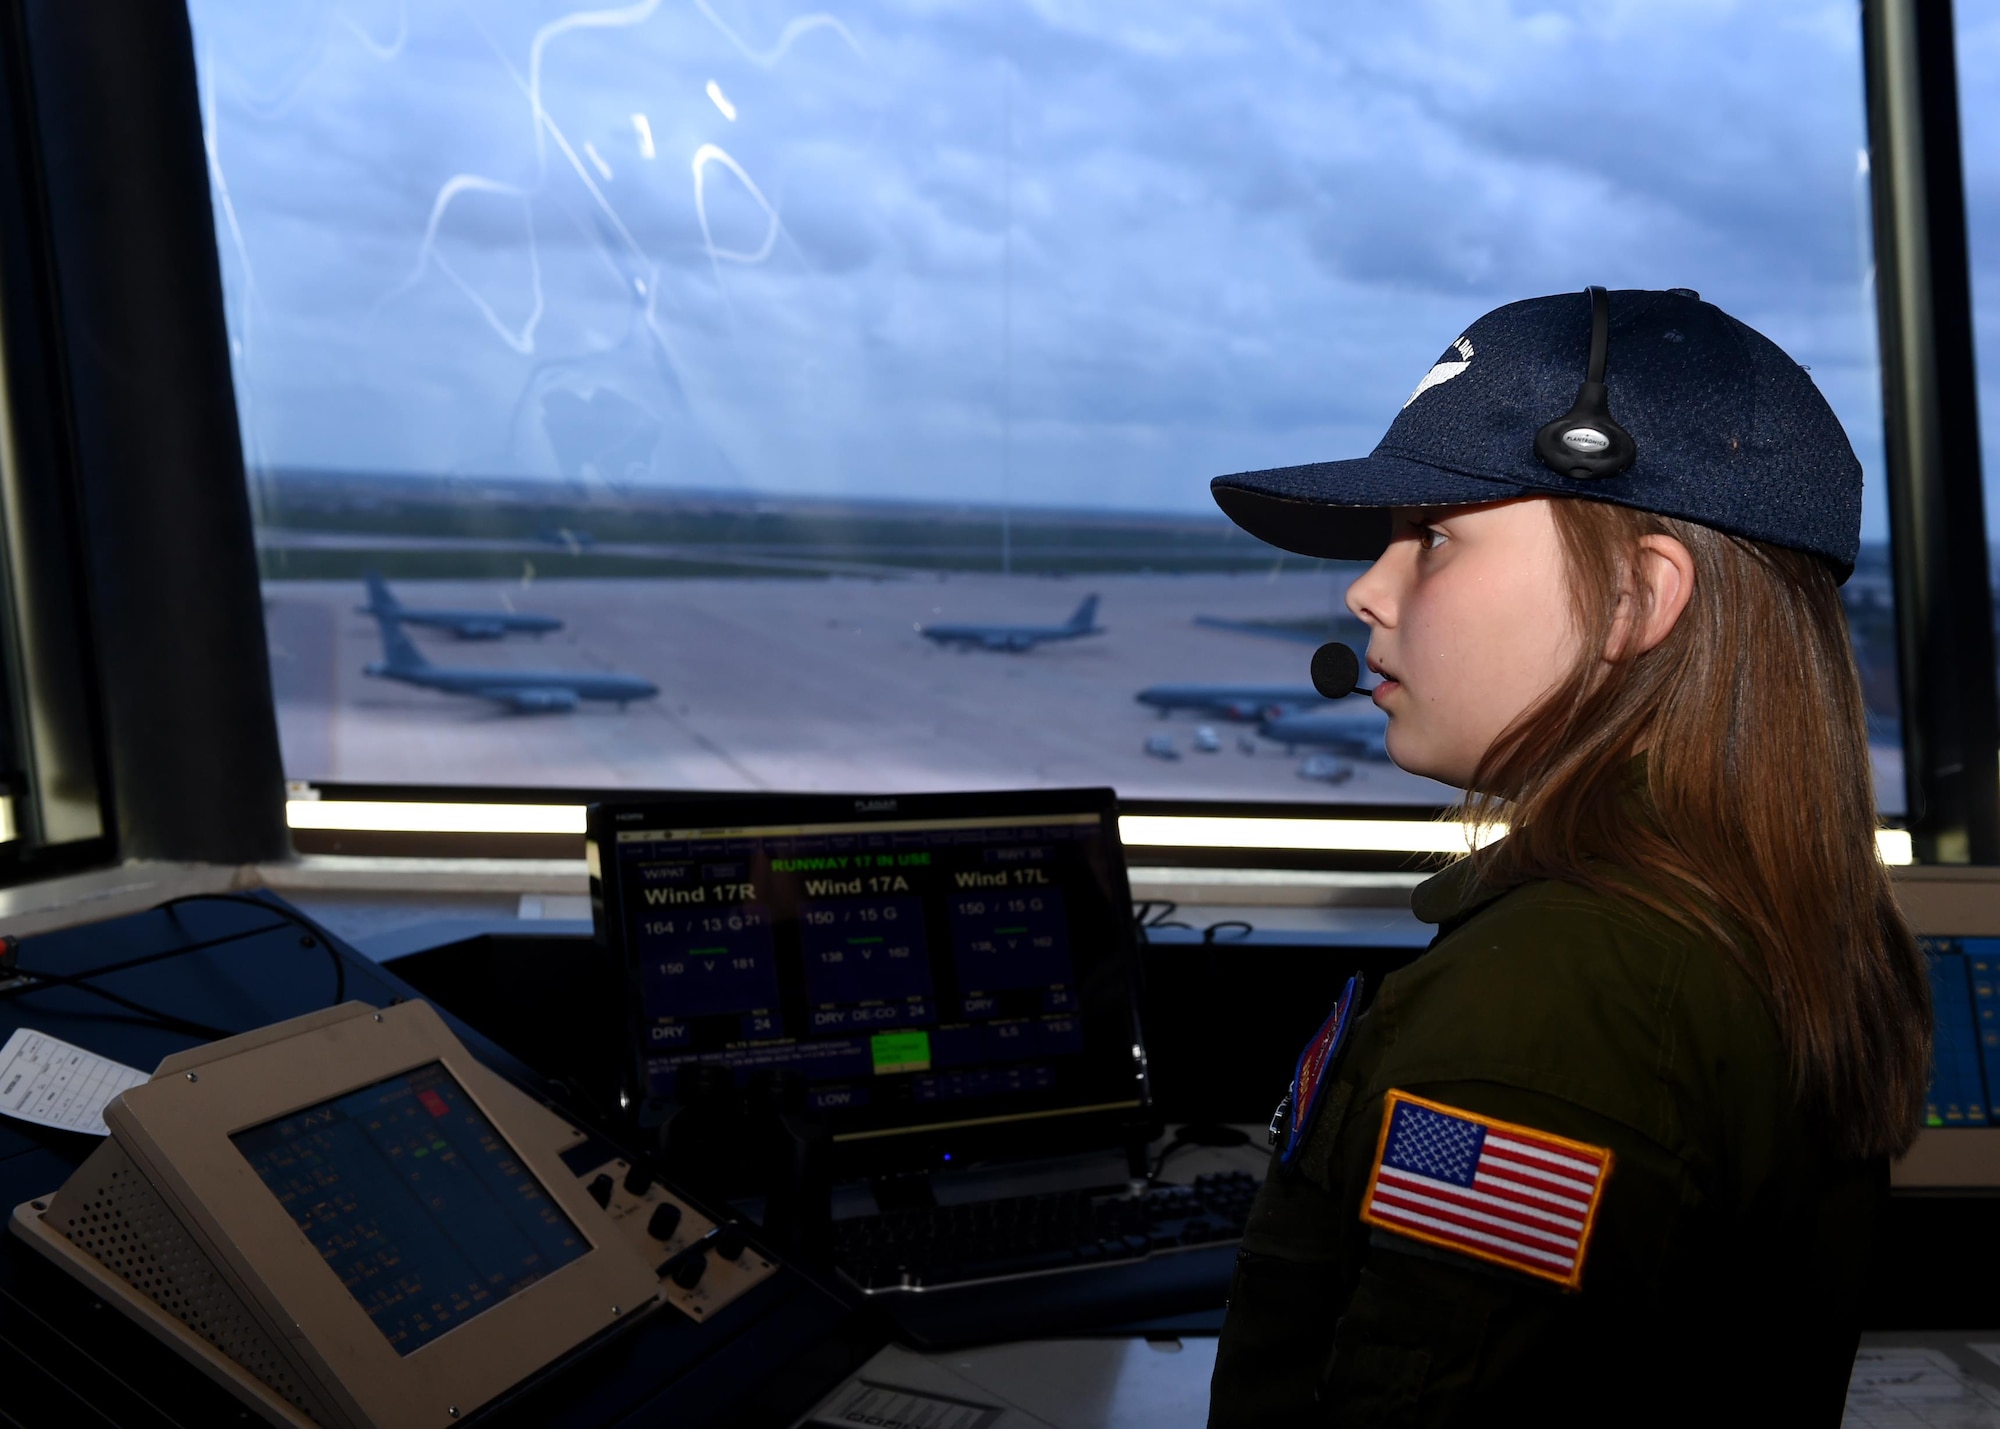 Maddy Hunt looks out at the Altus Air Force Base flightline during the Pilot for a Day Program at Altus AFB Oklahoma, April 14, 2017. The Pilot for a Day Program allows a child with a serious illness to tour the base and experience multiple aspects of Air Force life. (U.S. Air Force photo by SrA. Megan E. Myhre/Released)